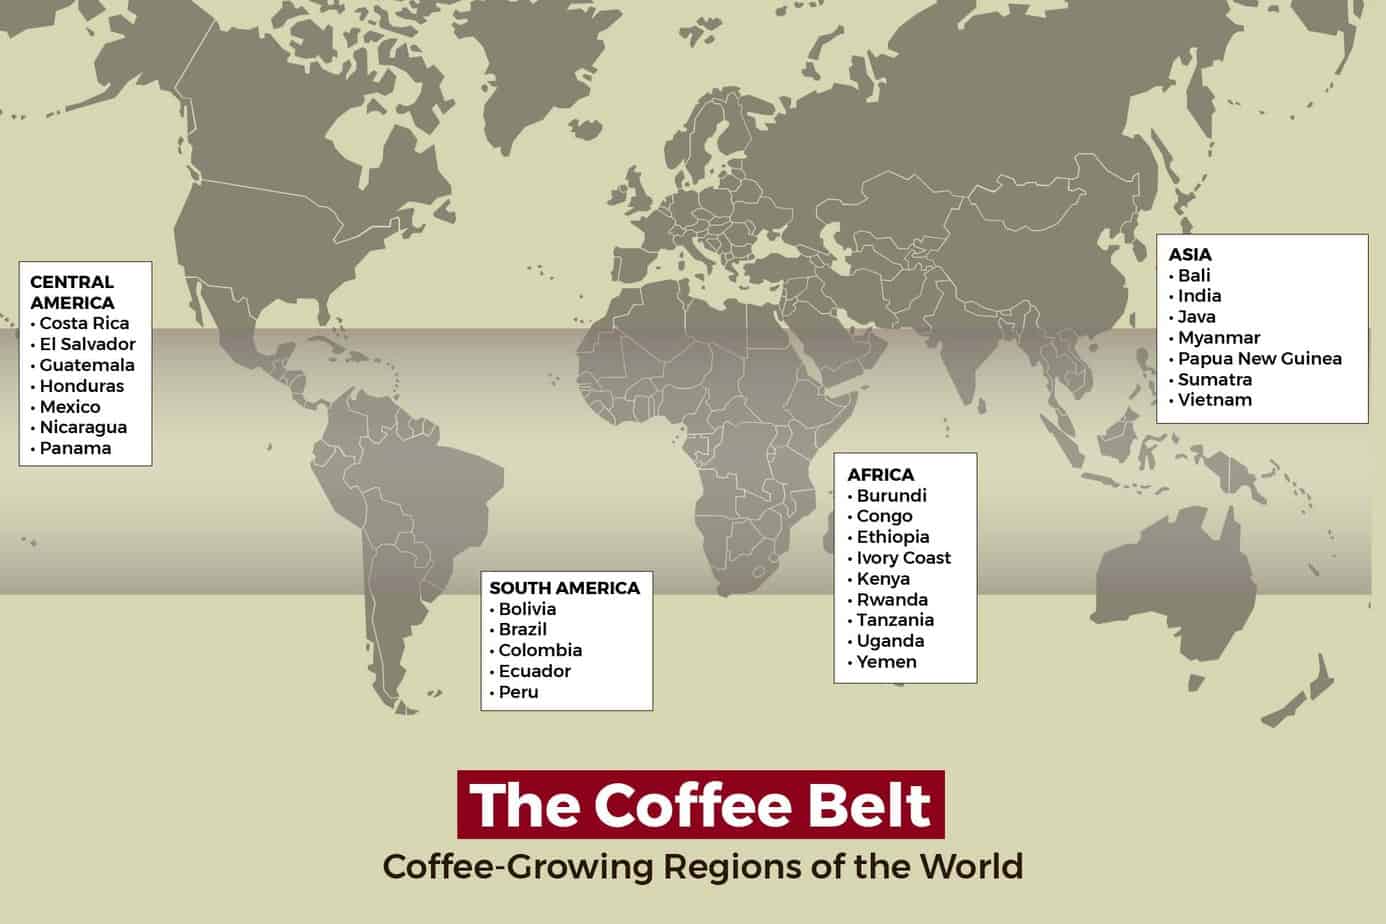 Map of the world showing regions near the equator where coffee is grown